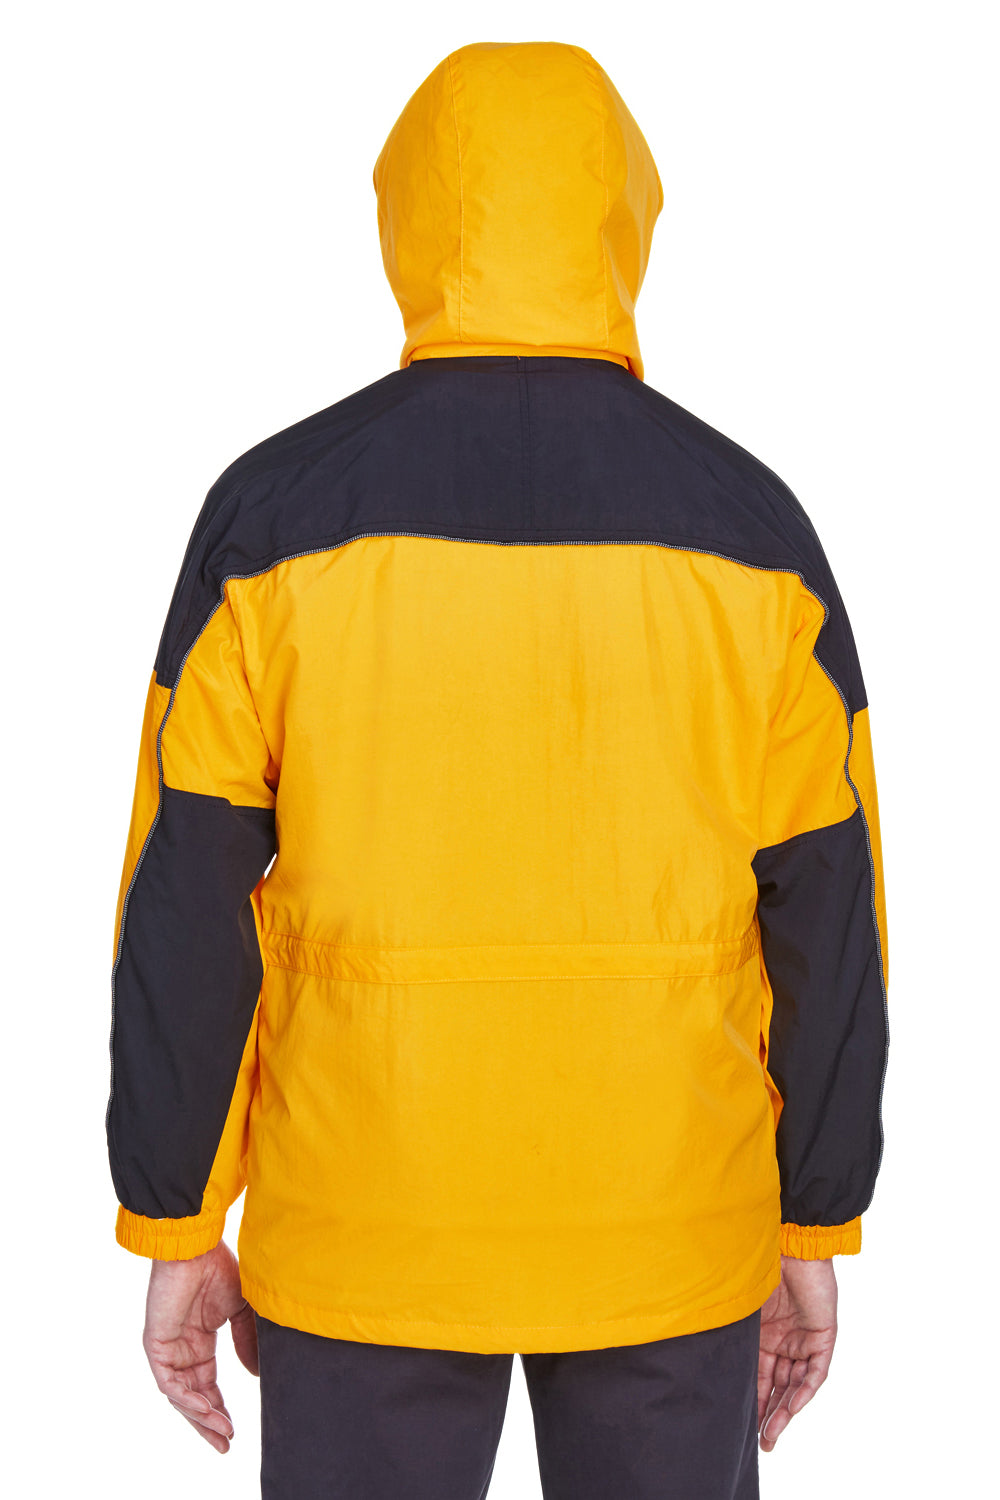 North End 88006 Mens 3-in-1 Full Zip Hooded Jacket Yellow/Black Back